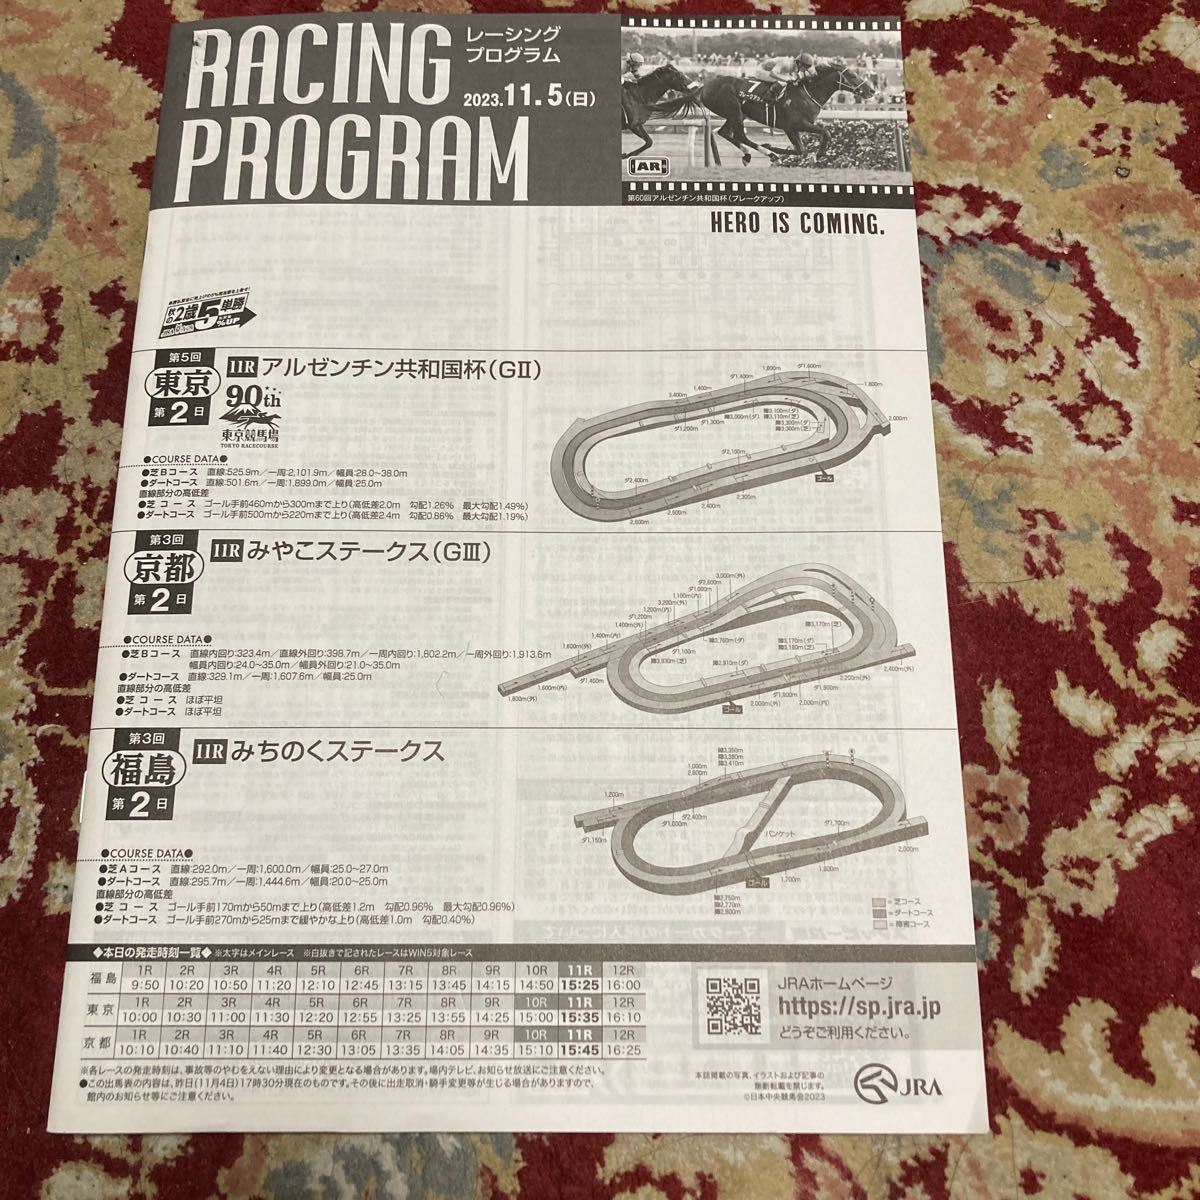 JRA Racing Program 2023.11.5( day ) Argentina also peace country cup (GⅡ),... stay ks(GⅢ),... . stay ks